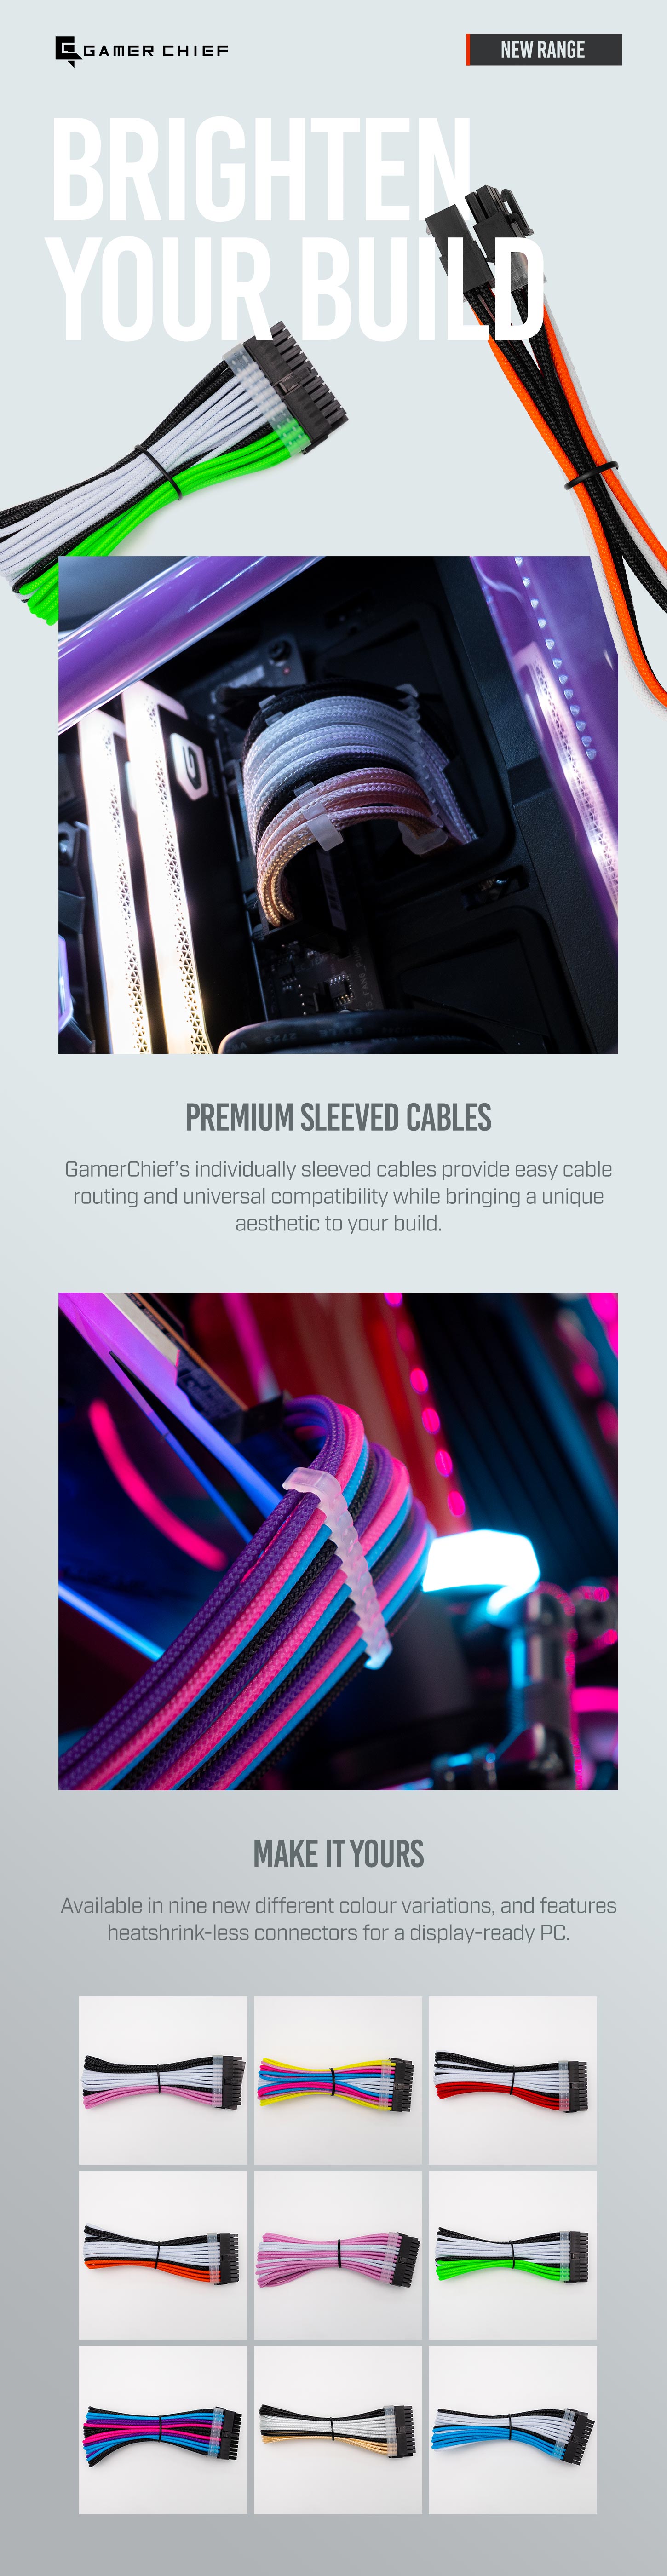 A large marketing image providing additional information about the product GamerChief Elite Series 24-Pin ATX 30cm Sleeved Extension Cable (Blue / Pink / Purple / Black) - Additional alt info not provided